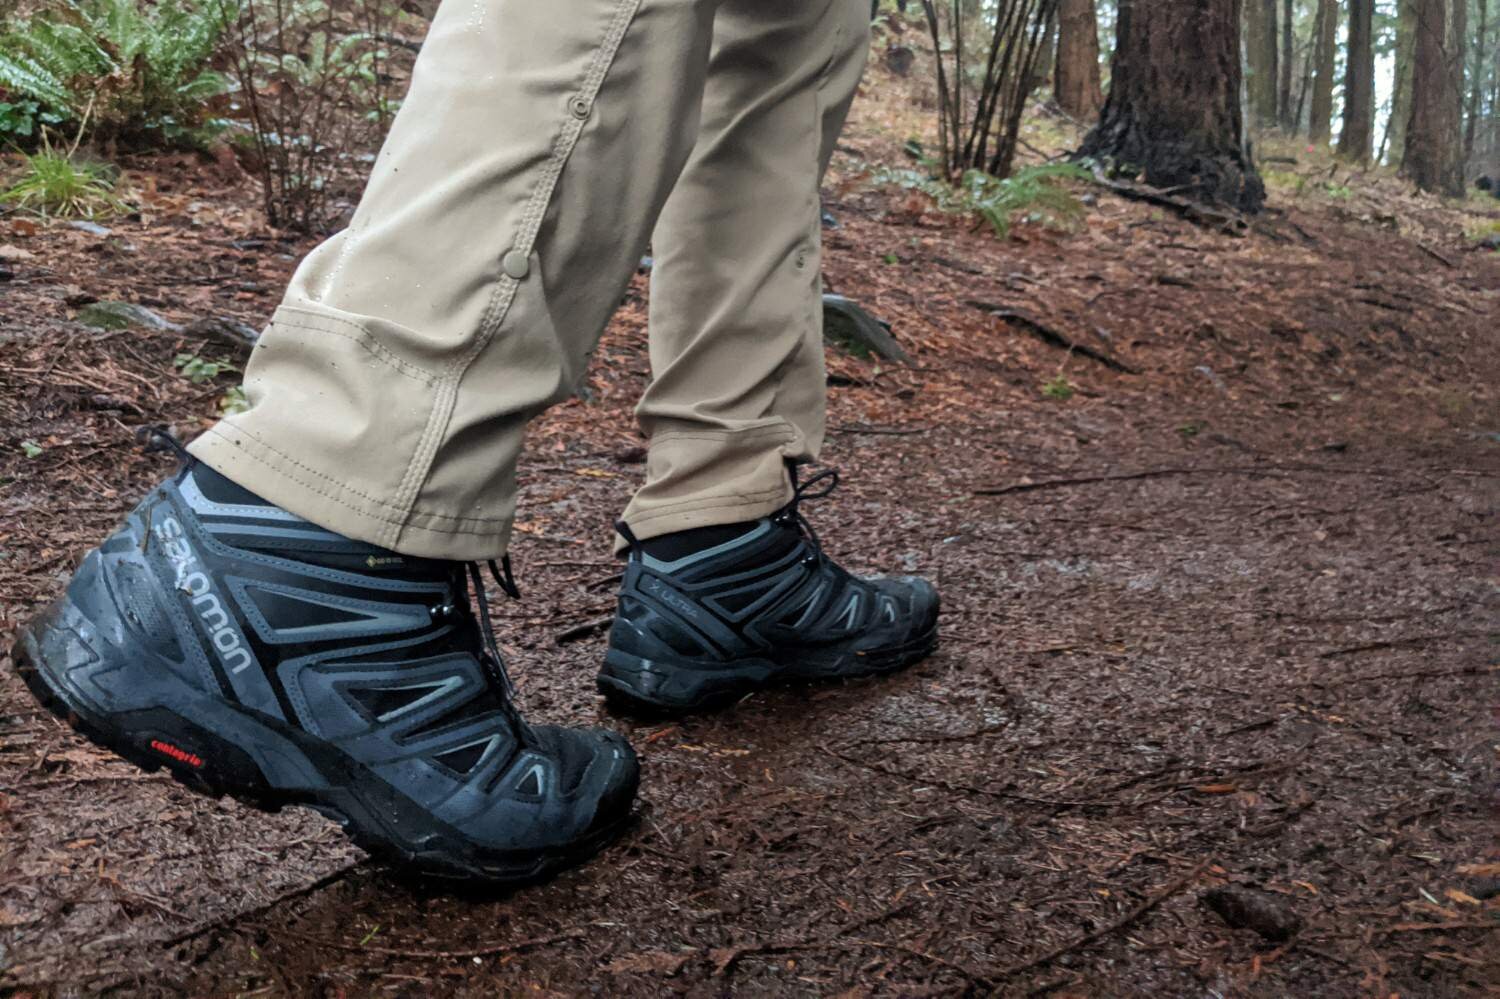 Wearing one of our top pick boots, the Salomon X Ultra 3 Mid GTX, during a soggy day hike